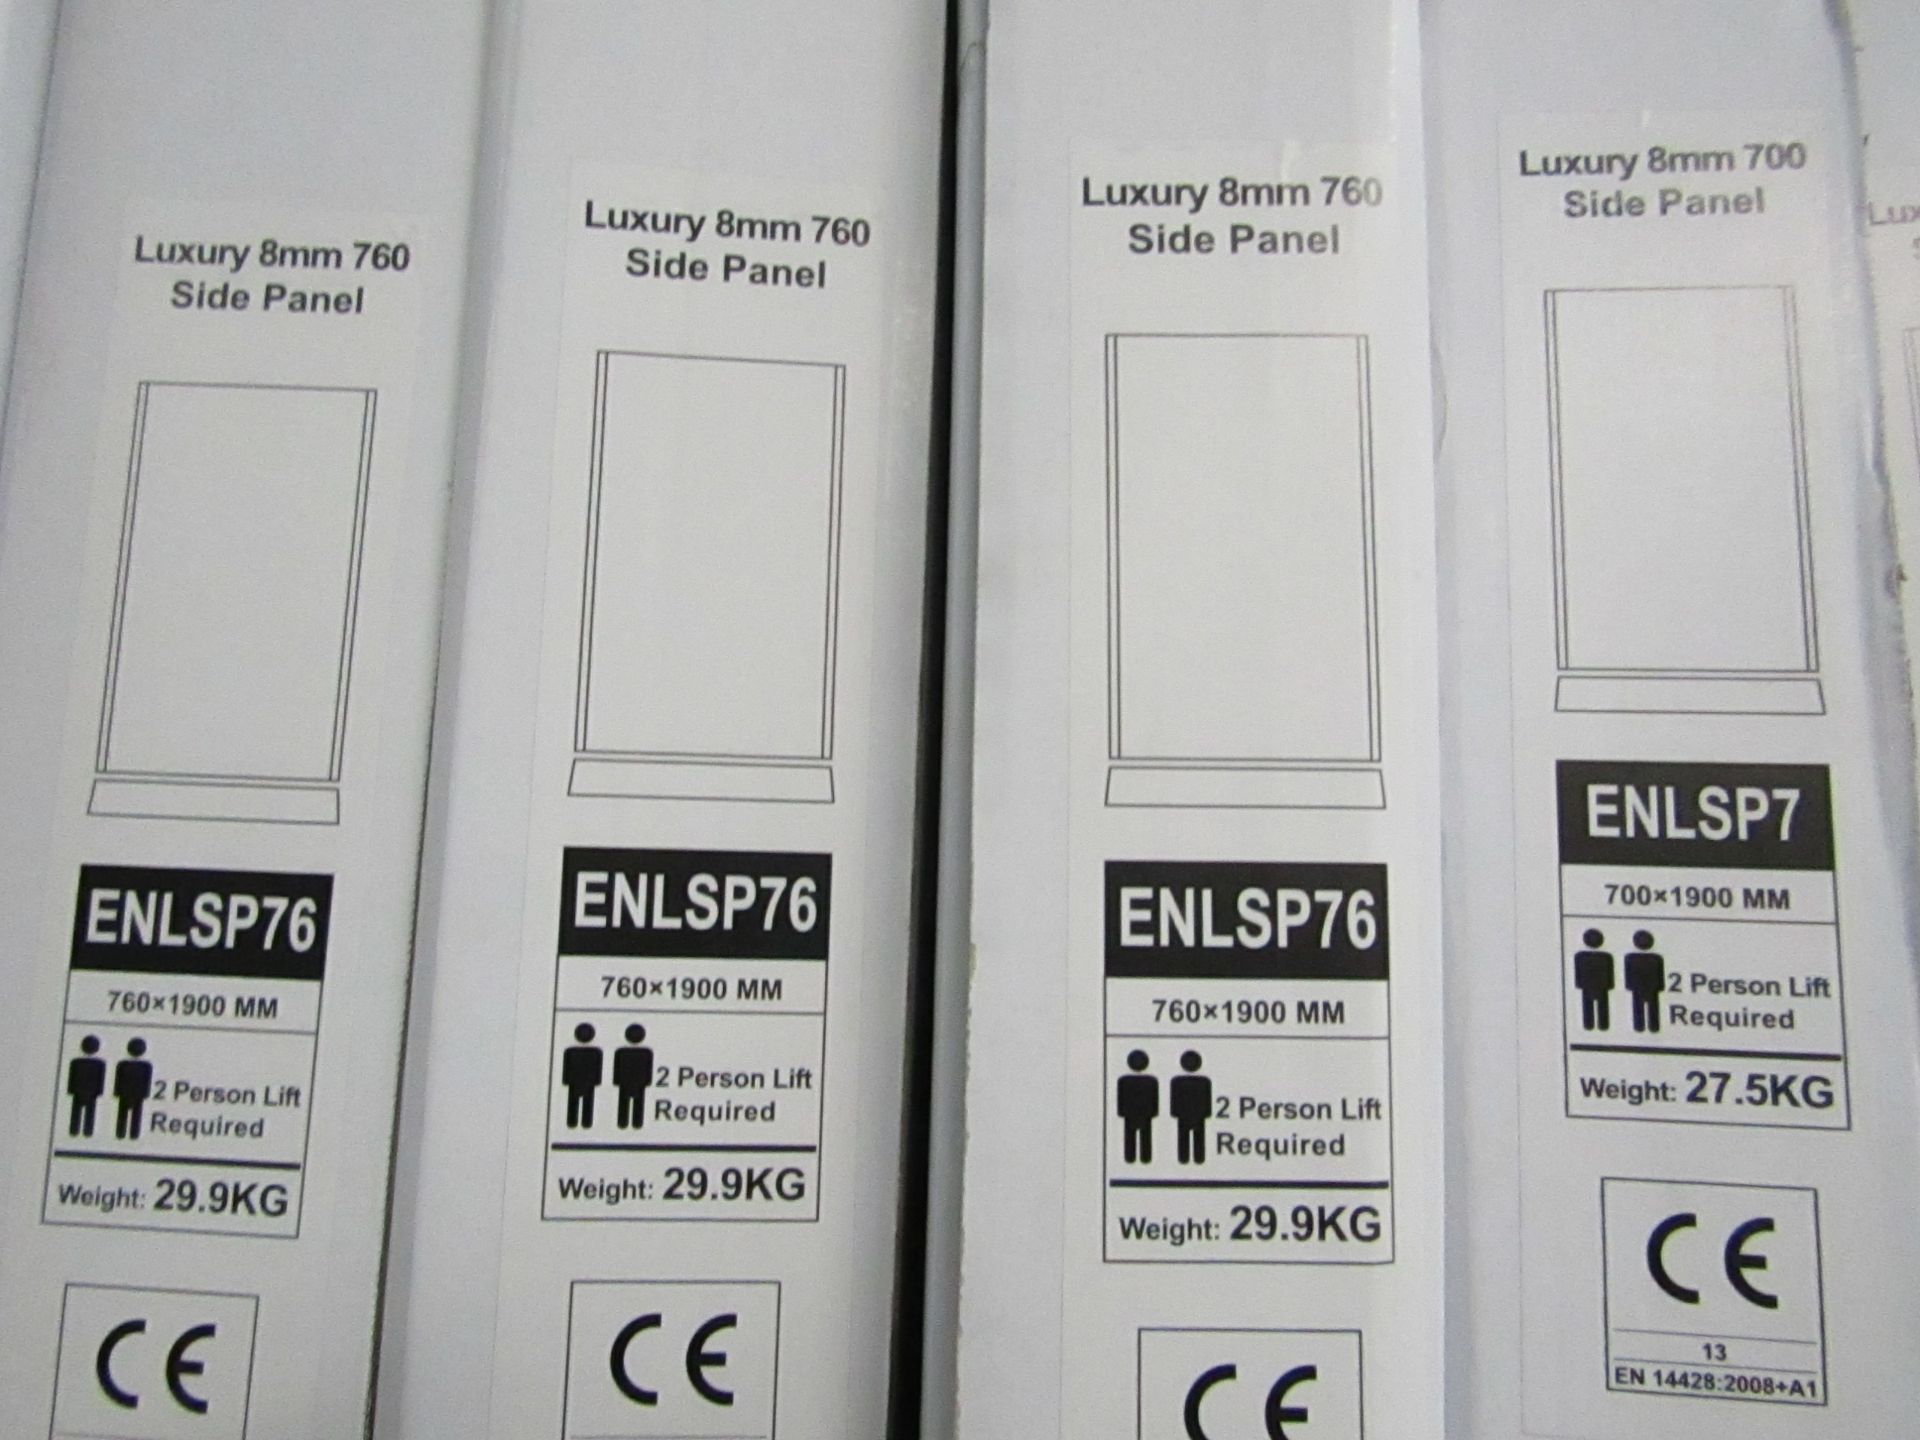 Luxury 8mm 760 side panel ENLSP76, new and boxed. RRP œ143.